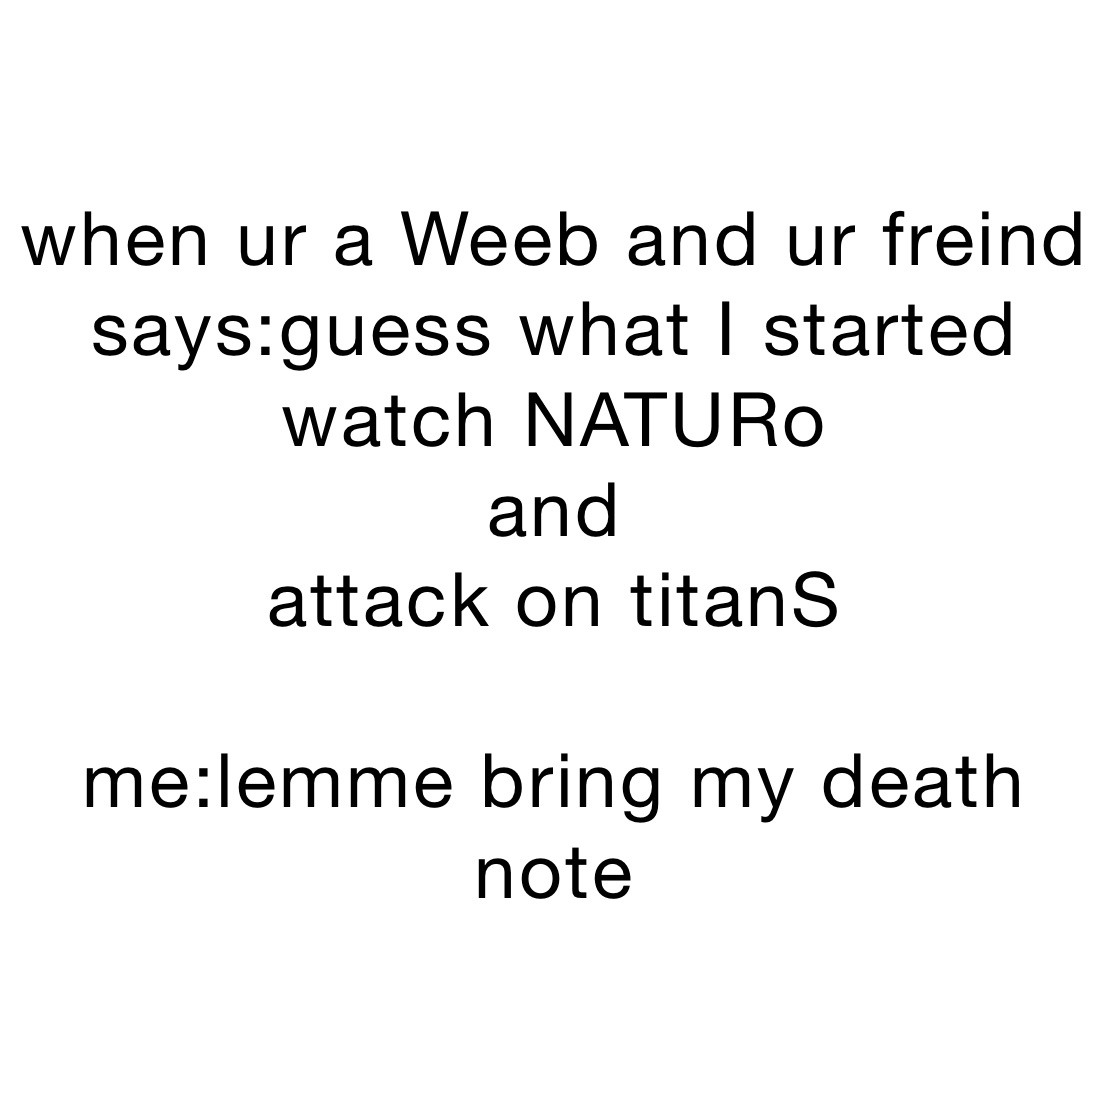 when ur a Weeb and ur freind says:guess what I started watch NATURo
and
attack on titanS

me:lemme bring my death note